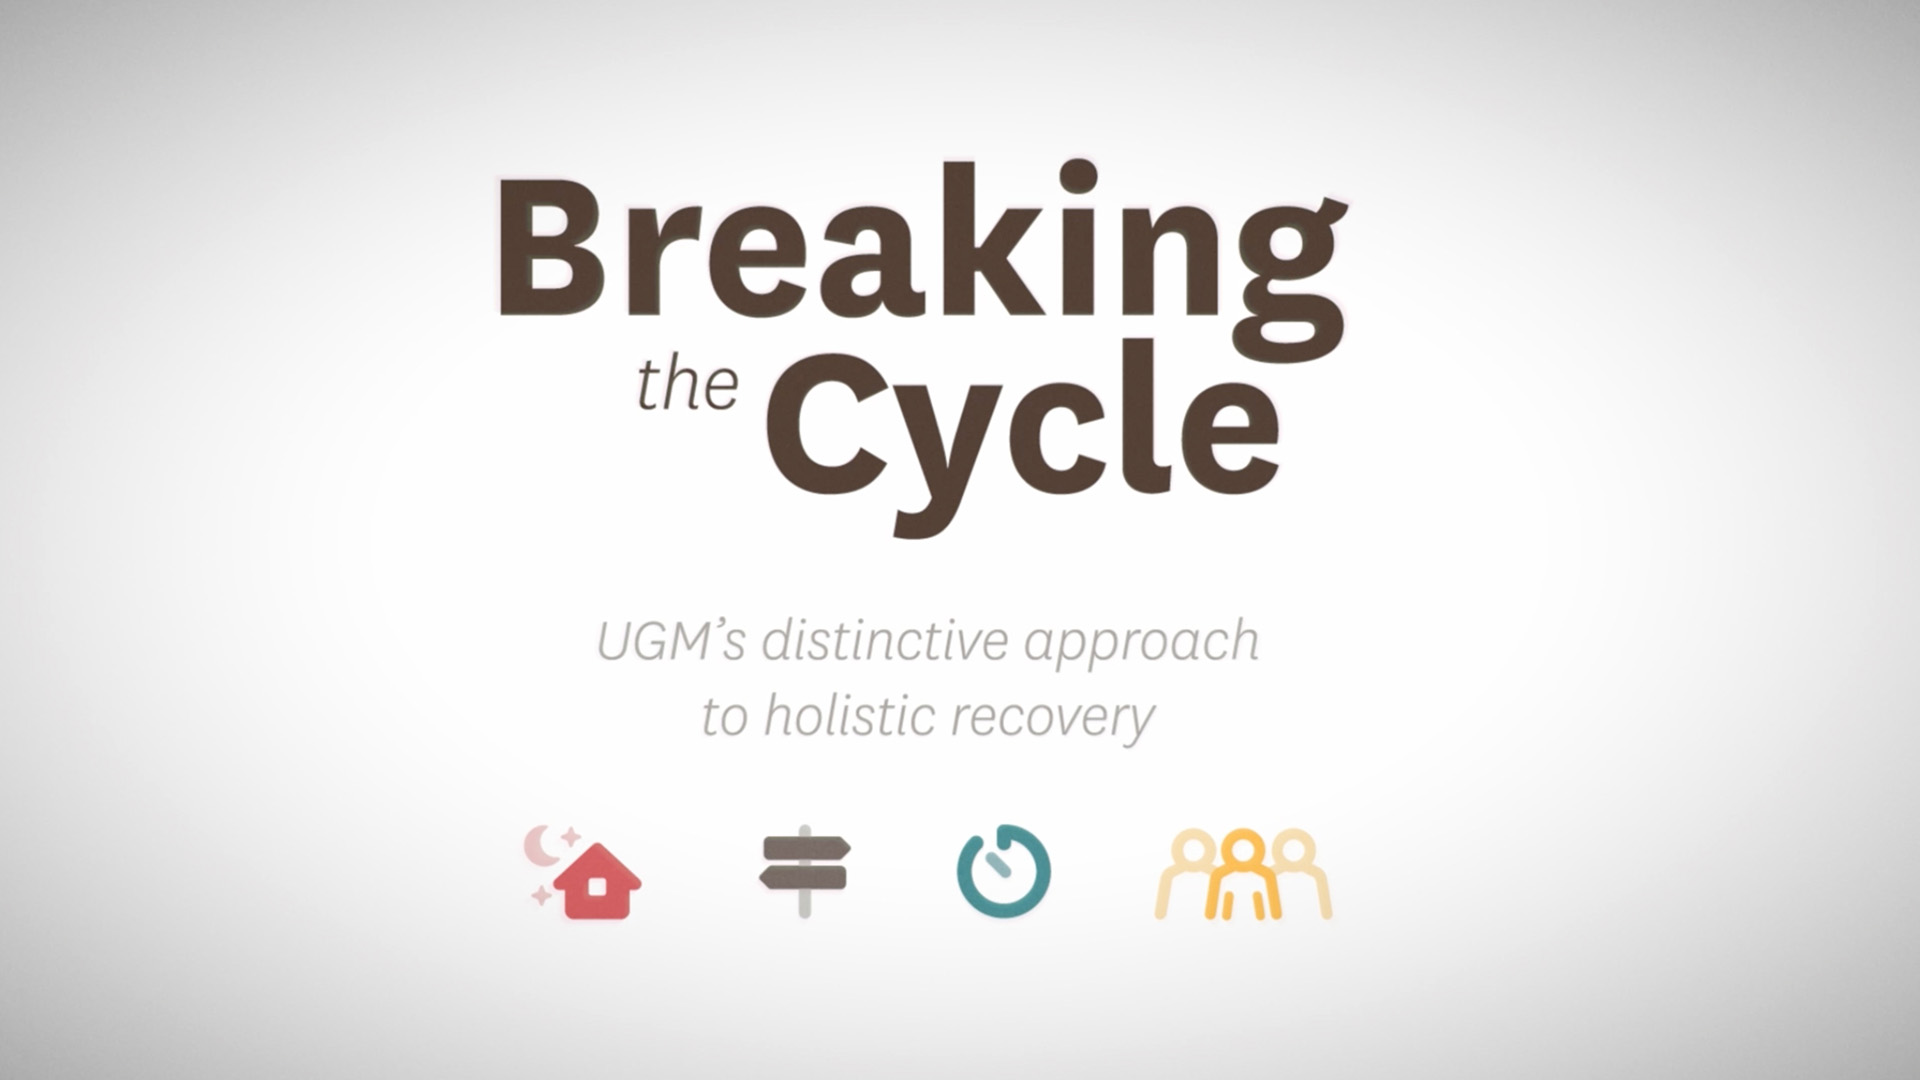 Breaking the Cycle - UGM's distinctive approach to holistic recovery (full)